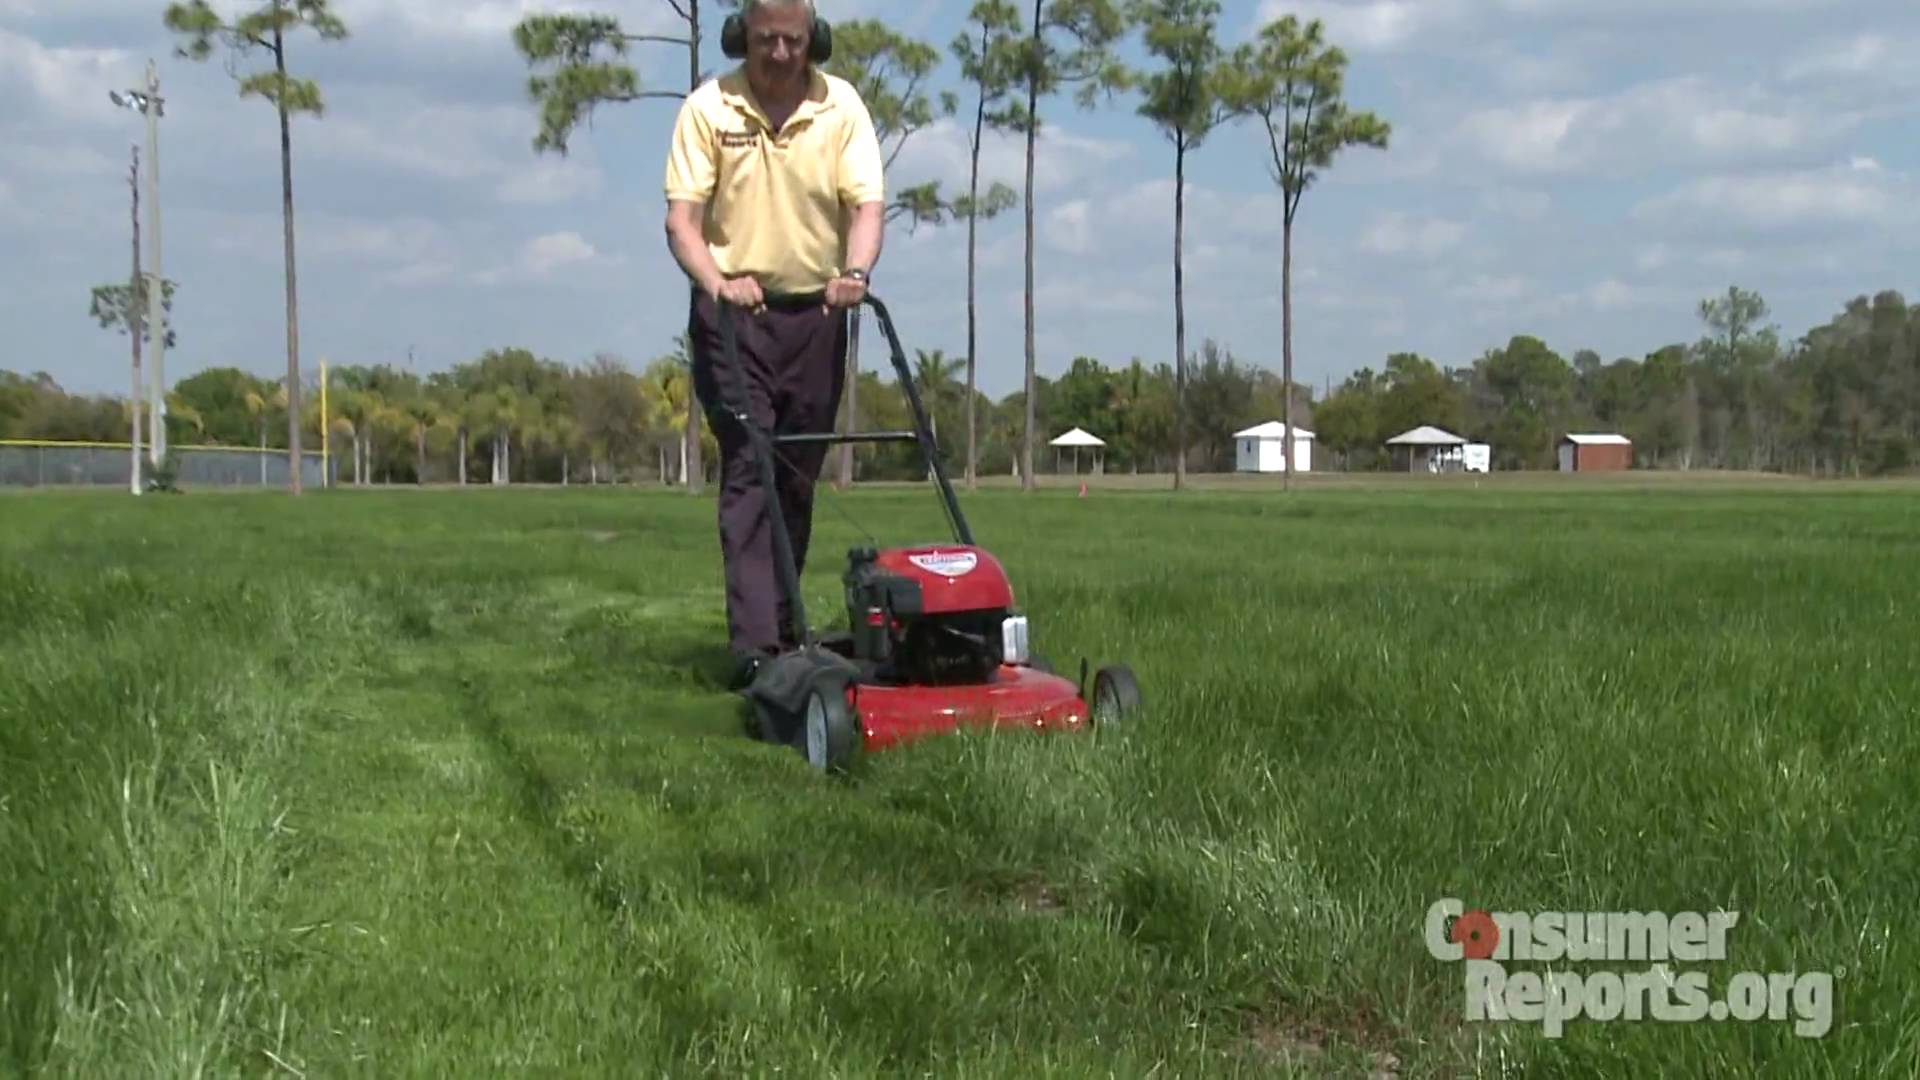 Lawn Mower Buying Guide | Consumer Reports - YouTube